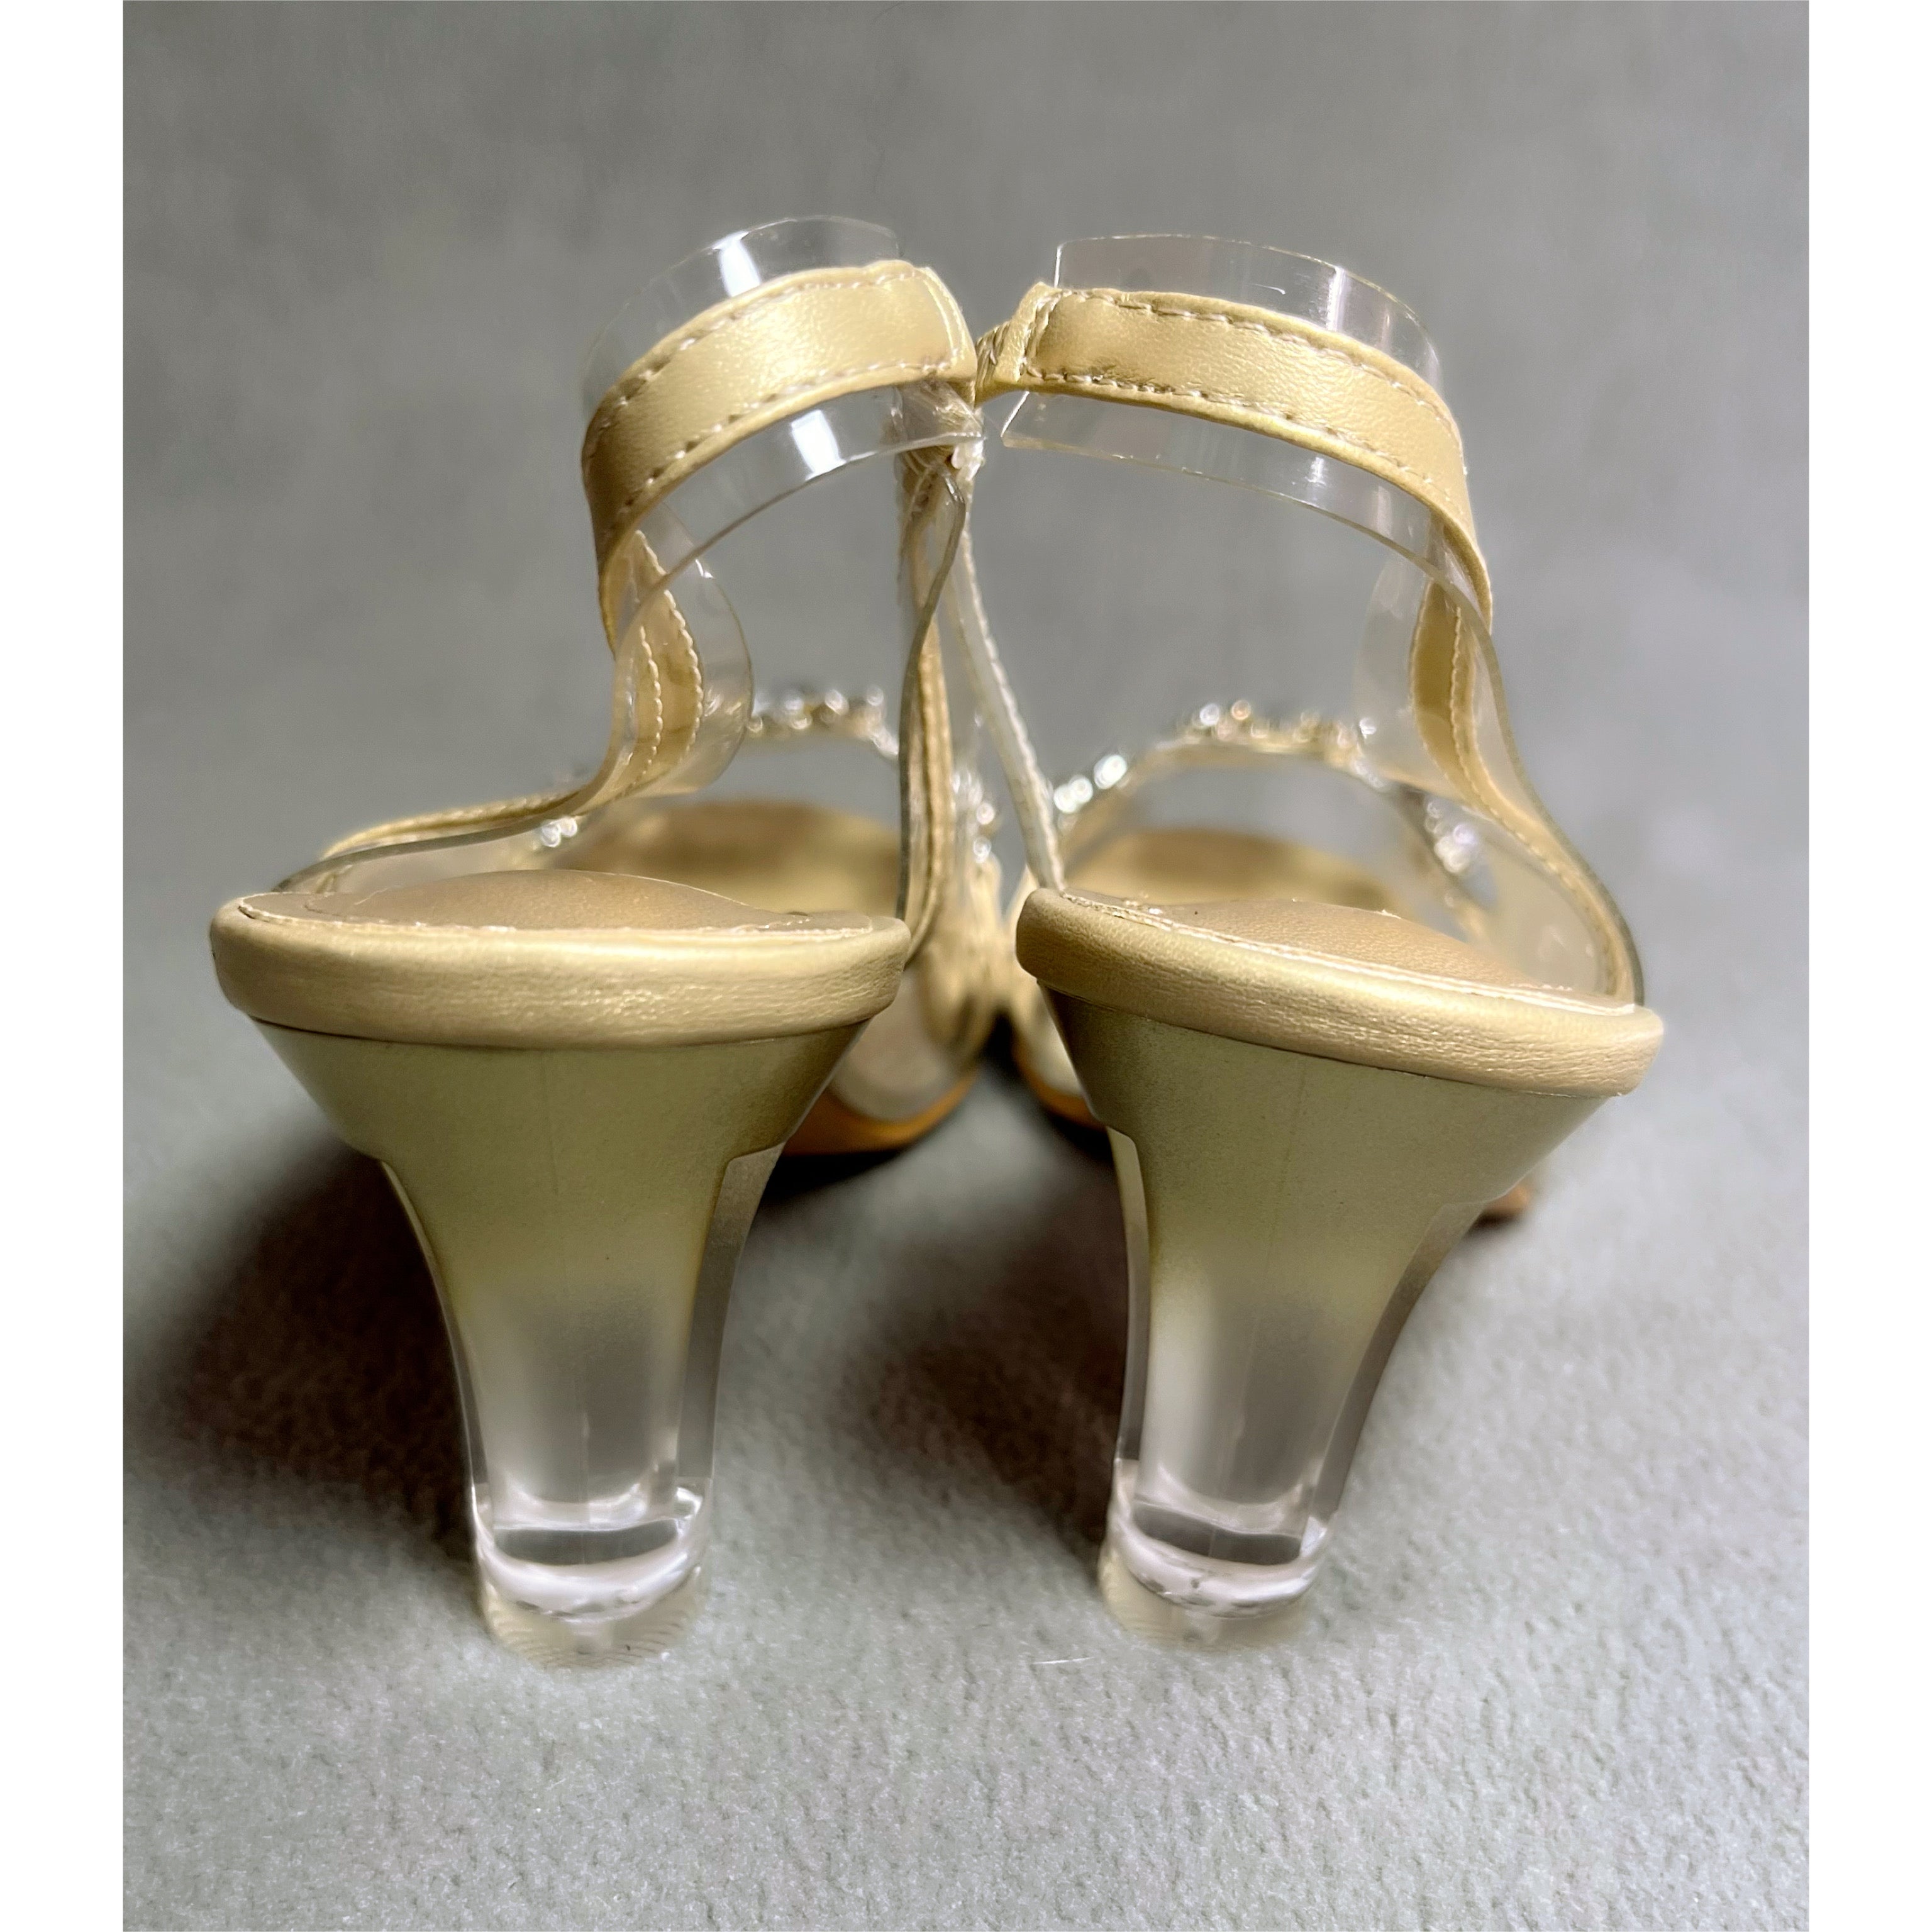 Allegra K gold shoes, size 8